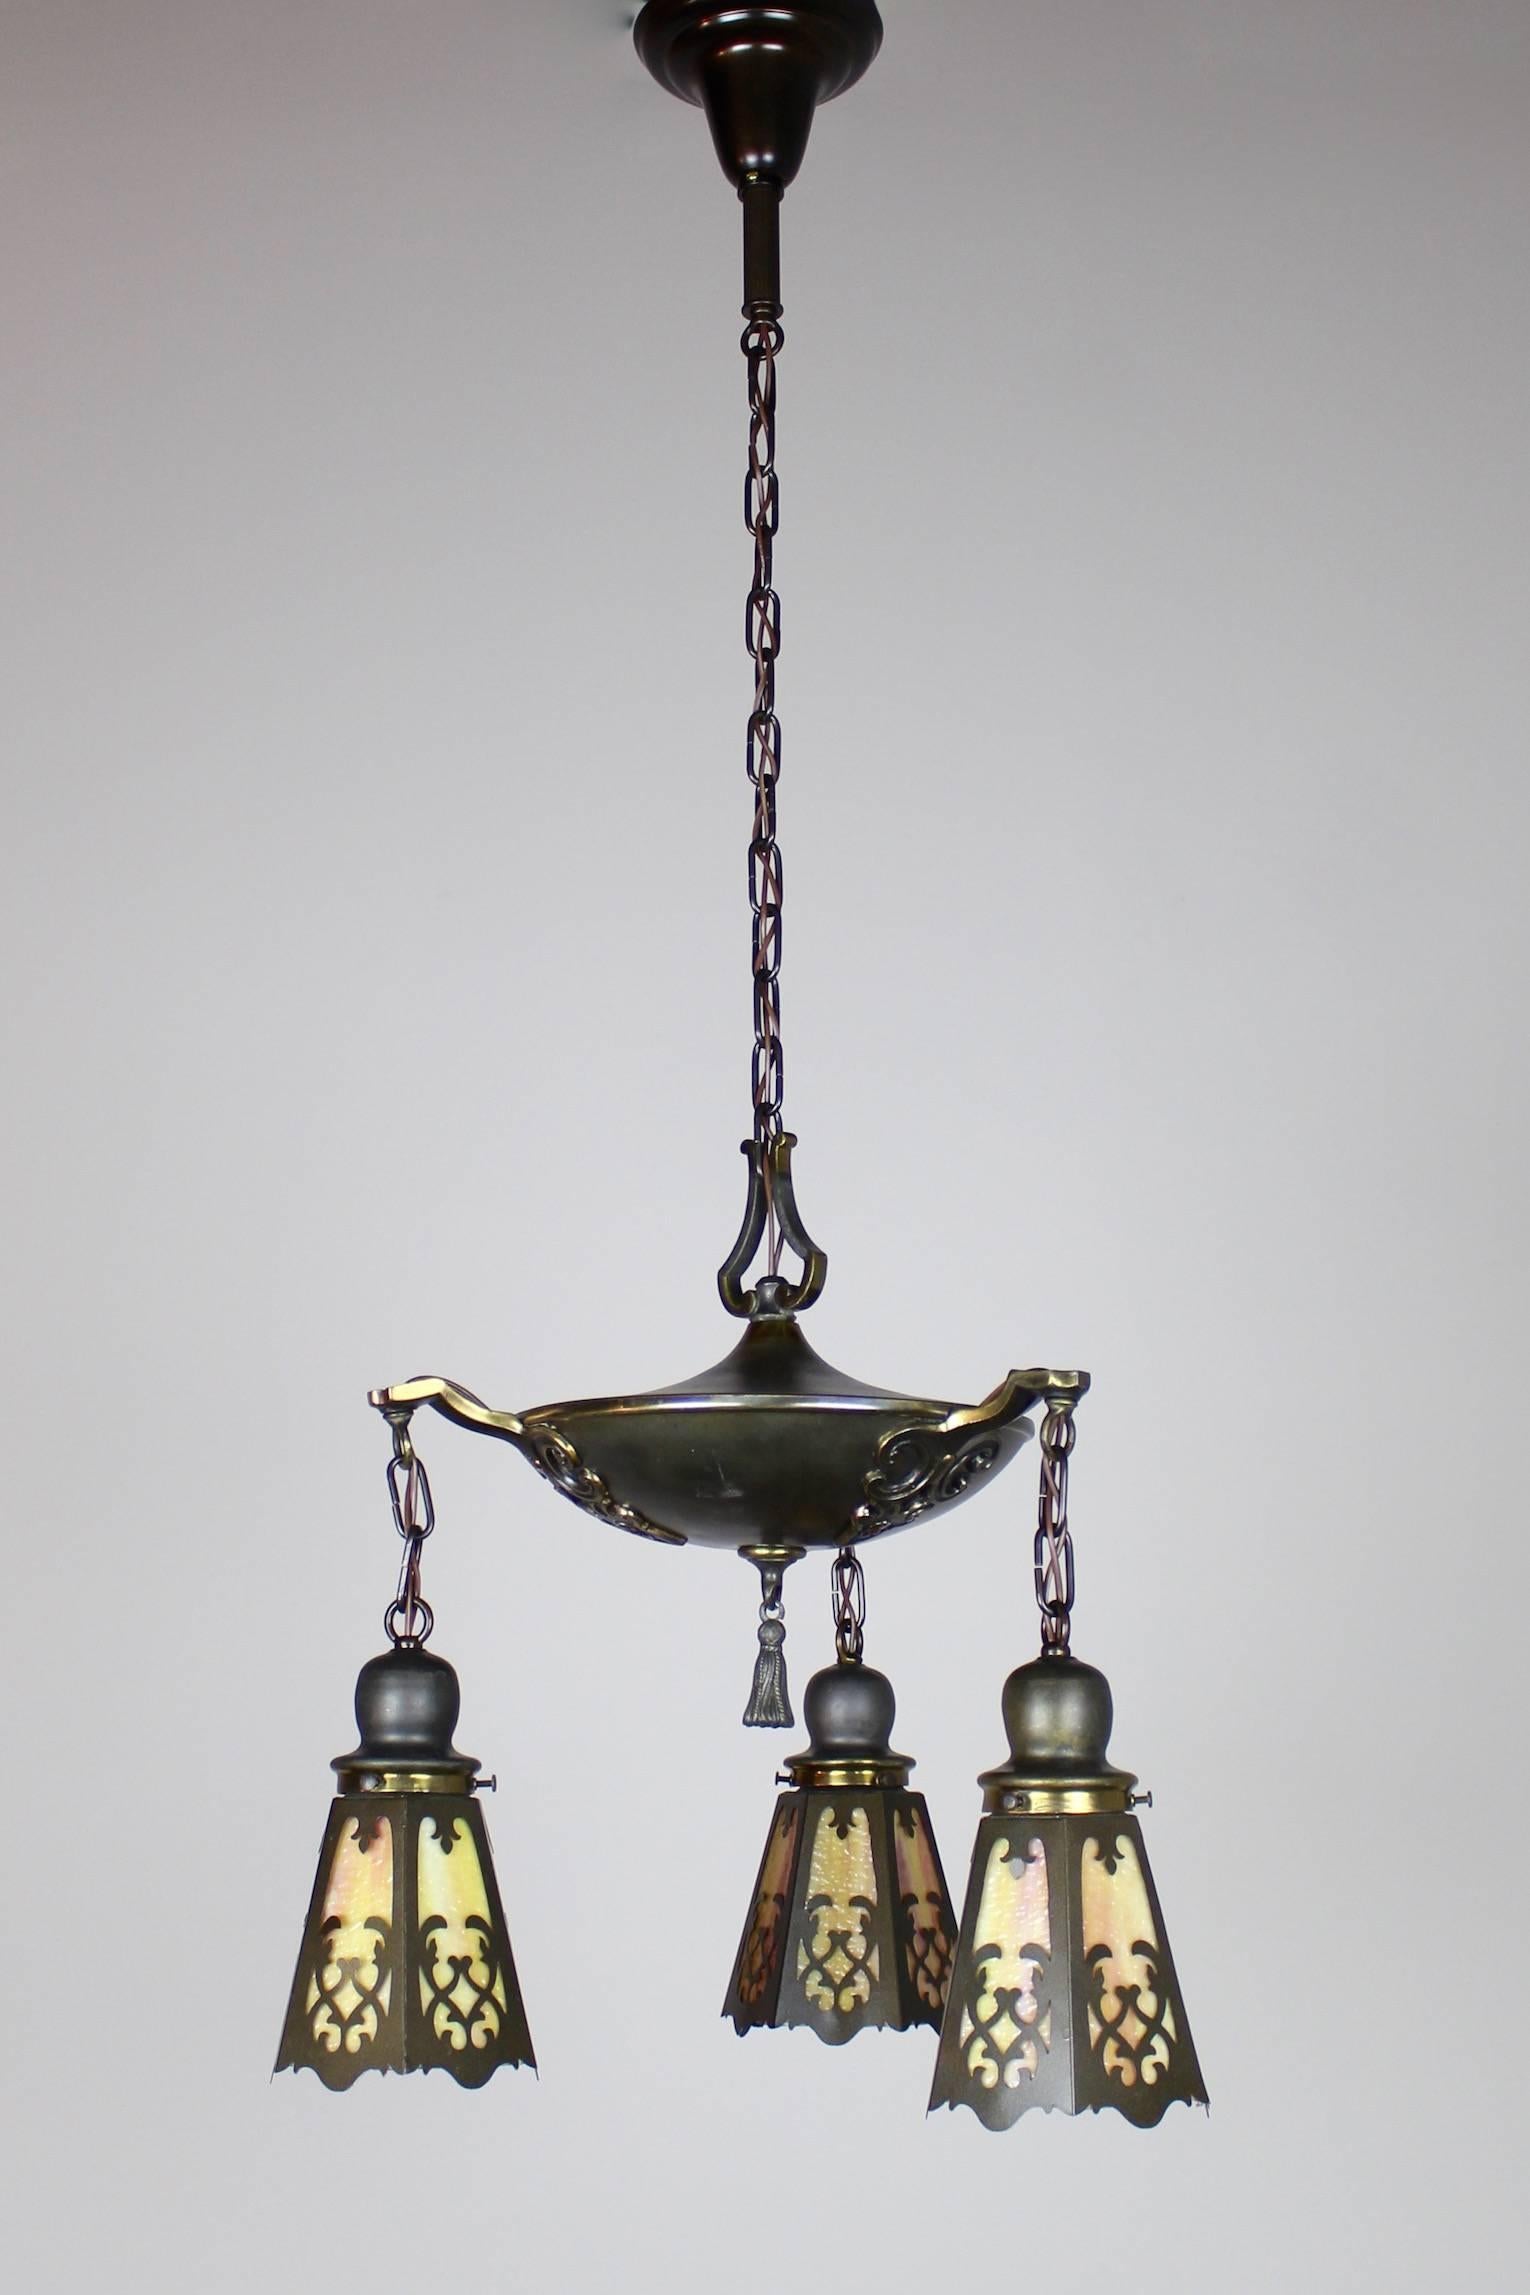 Classical Revival Tudor Pan Three-Light Fixture, circa 1920 In Excellent Condition For Sale In Vancouver, BC